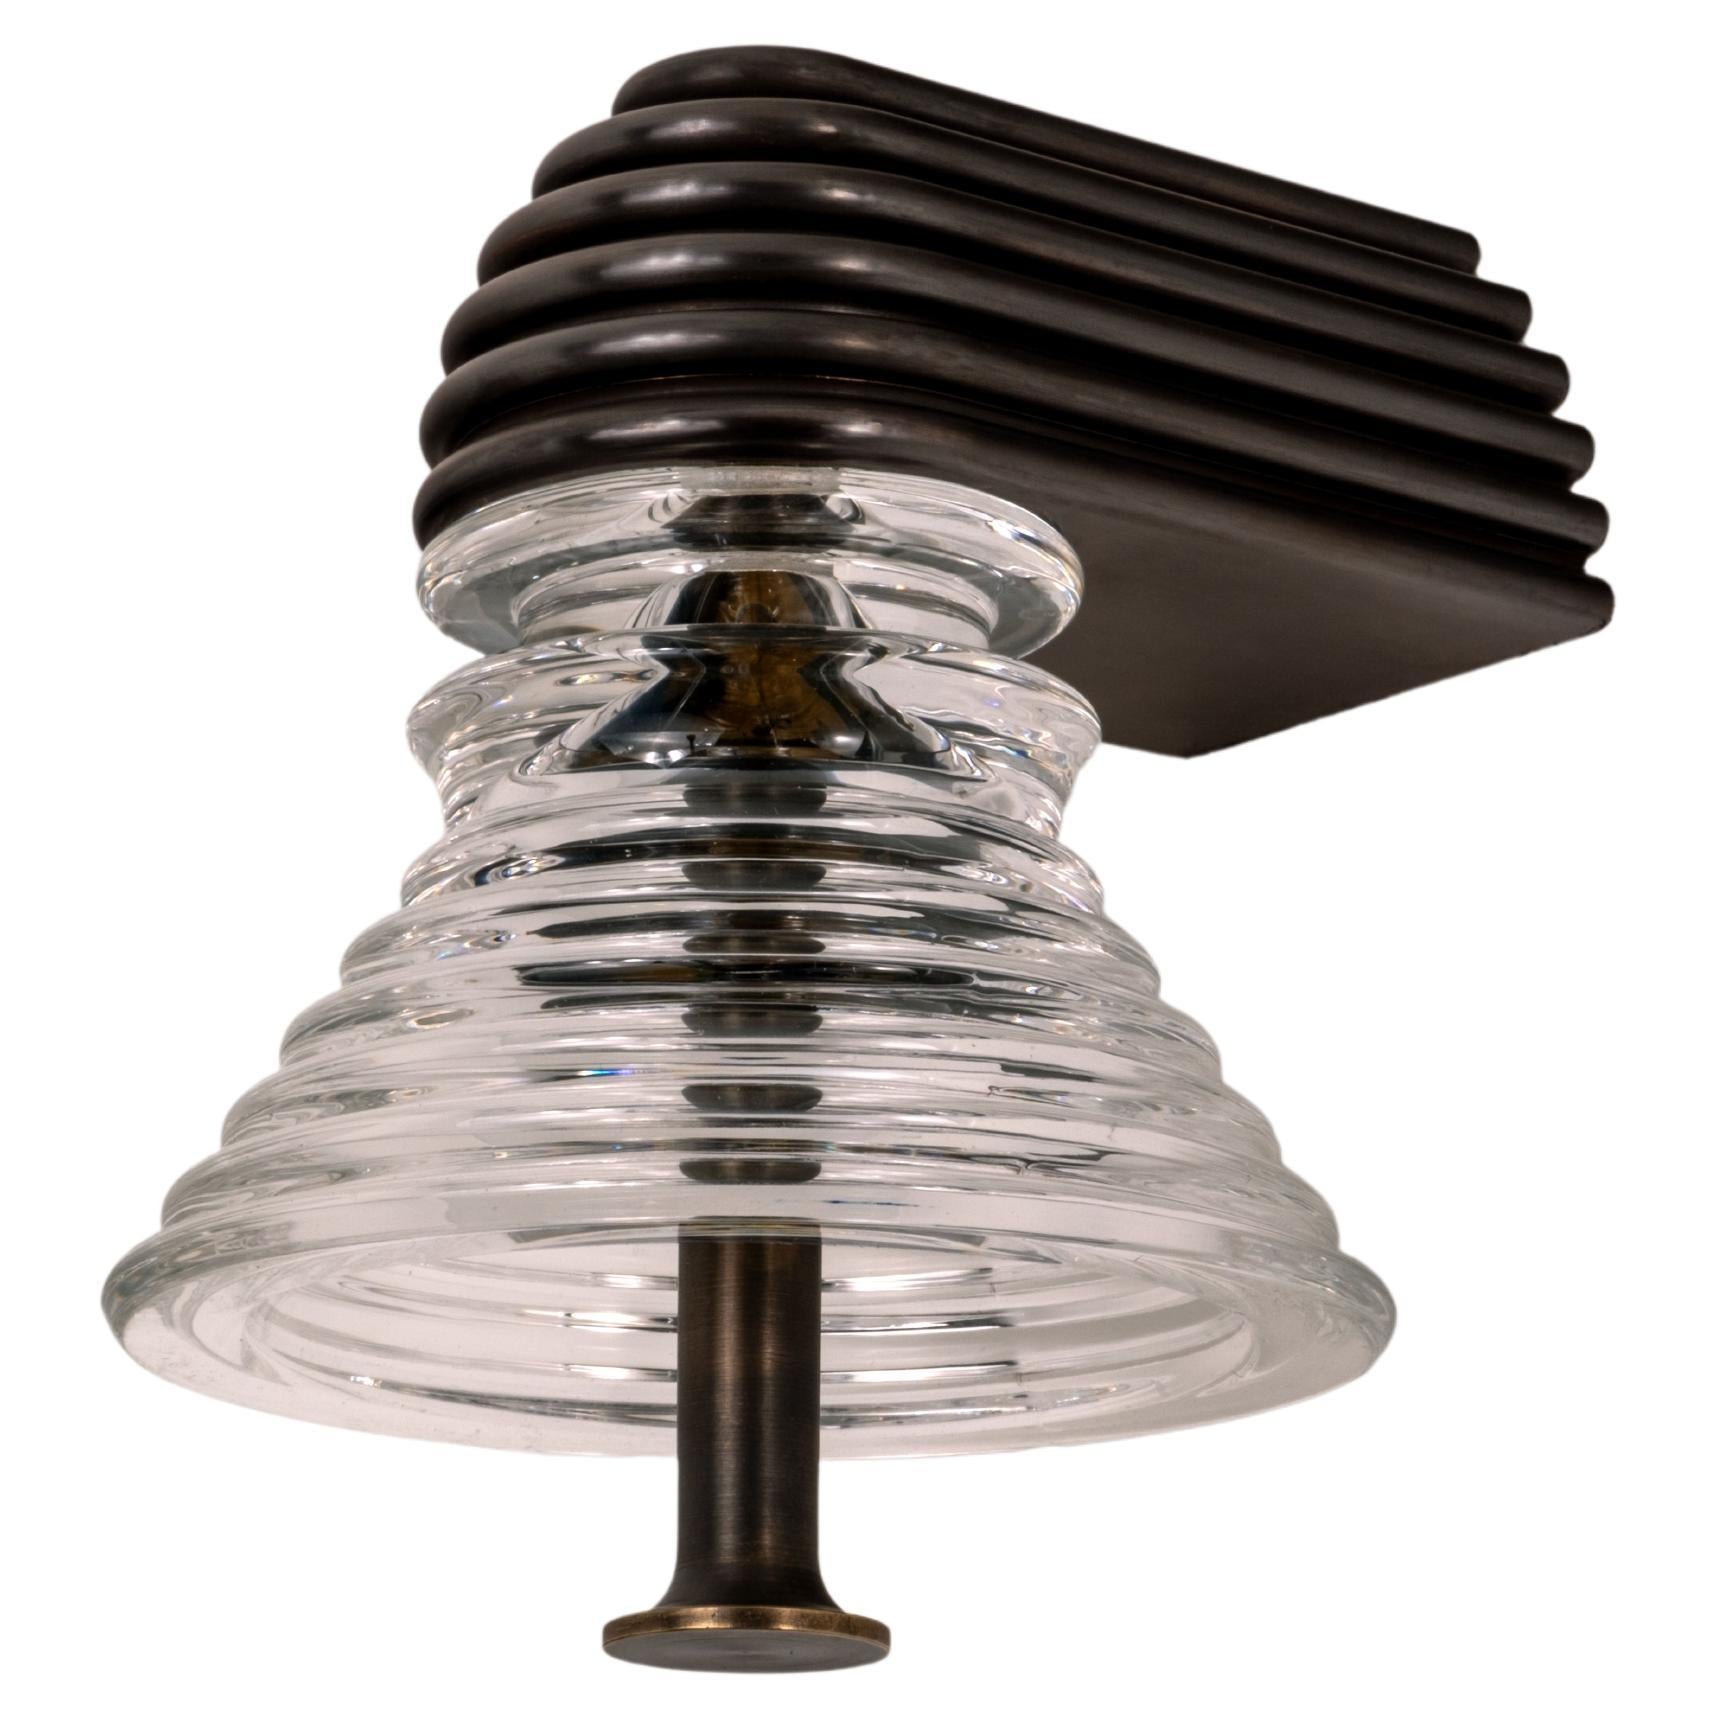 The Insulator 'A' Sconce in dark brass and clear glass by NOVOCASTRIAN deco For Sale